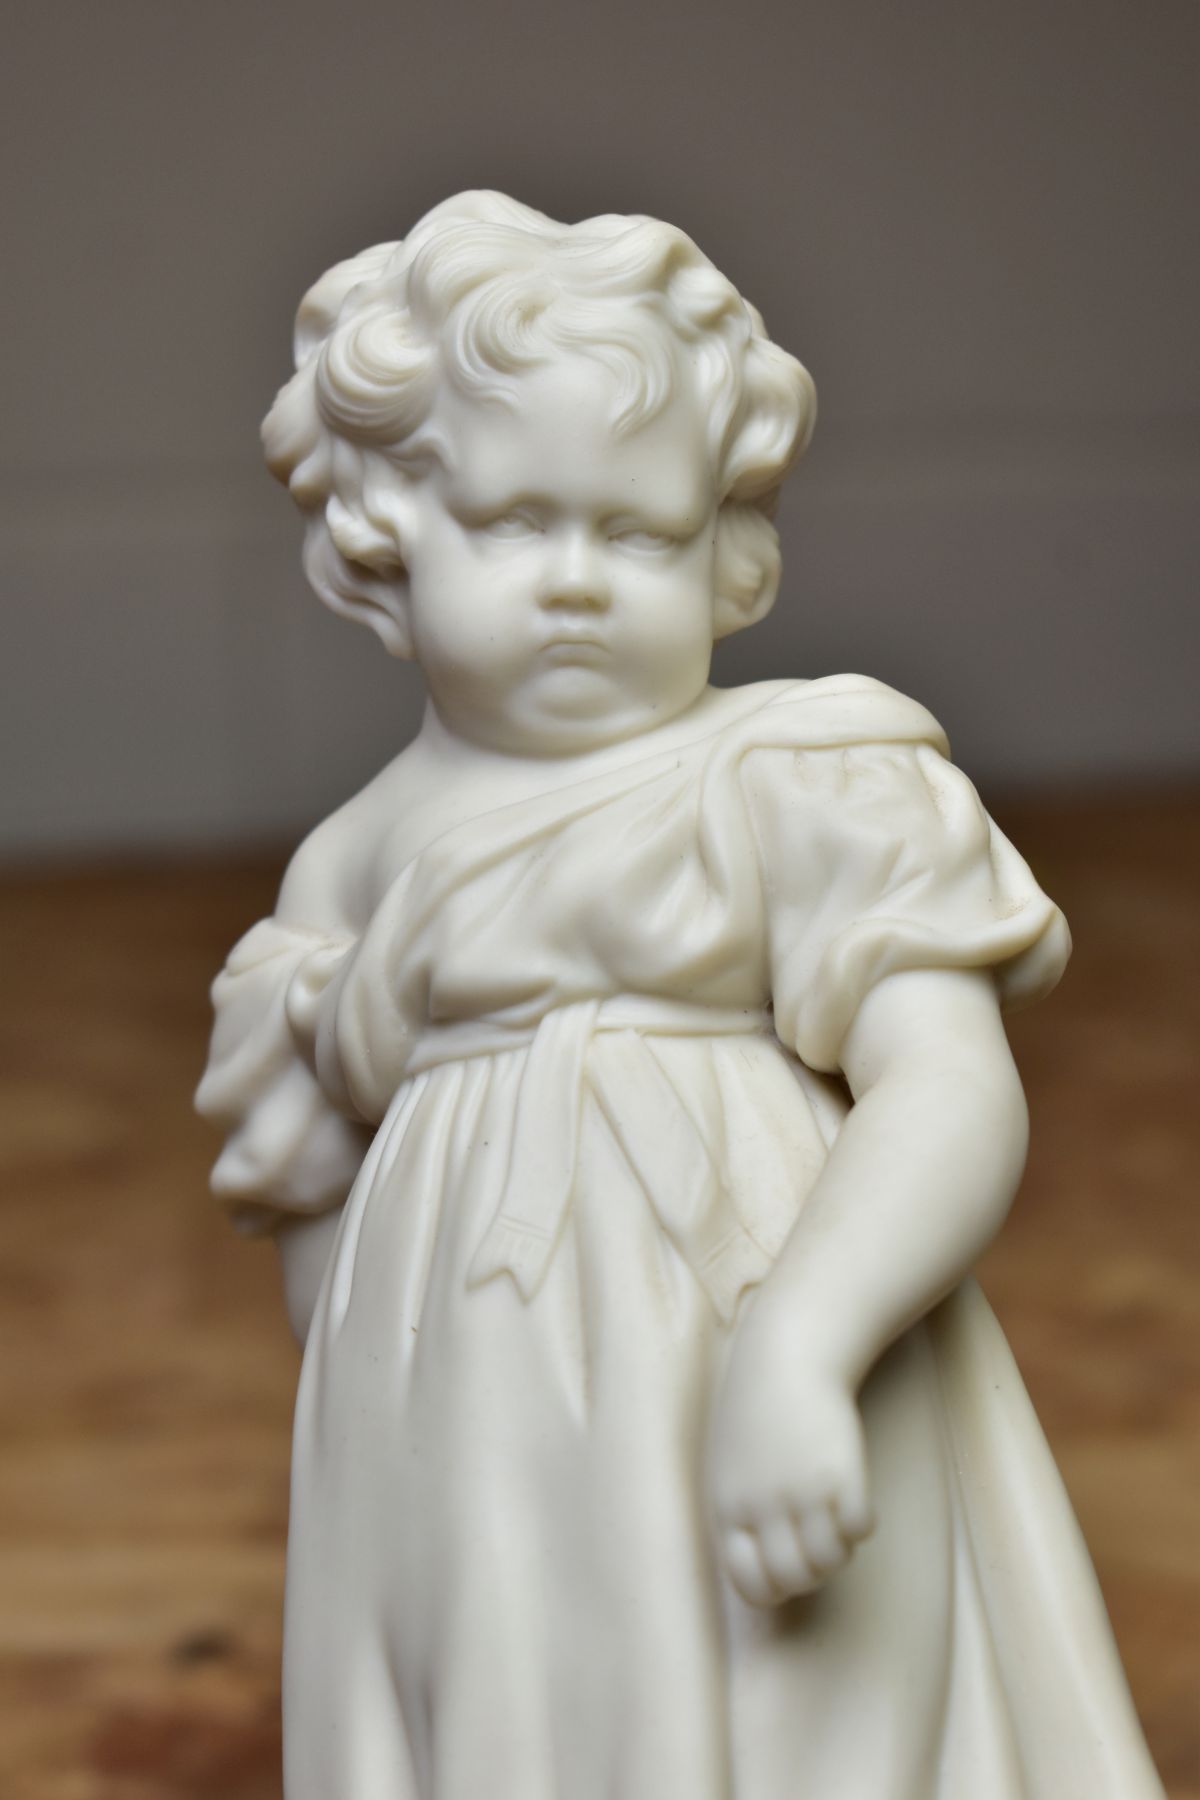 A VICTORIAN COPELAND PARIAN FIGURE OF 'BEATRICE' AND ANOTHER PARIAN FIGURE, the Copeland figure with - Image 8 of 8